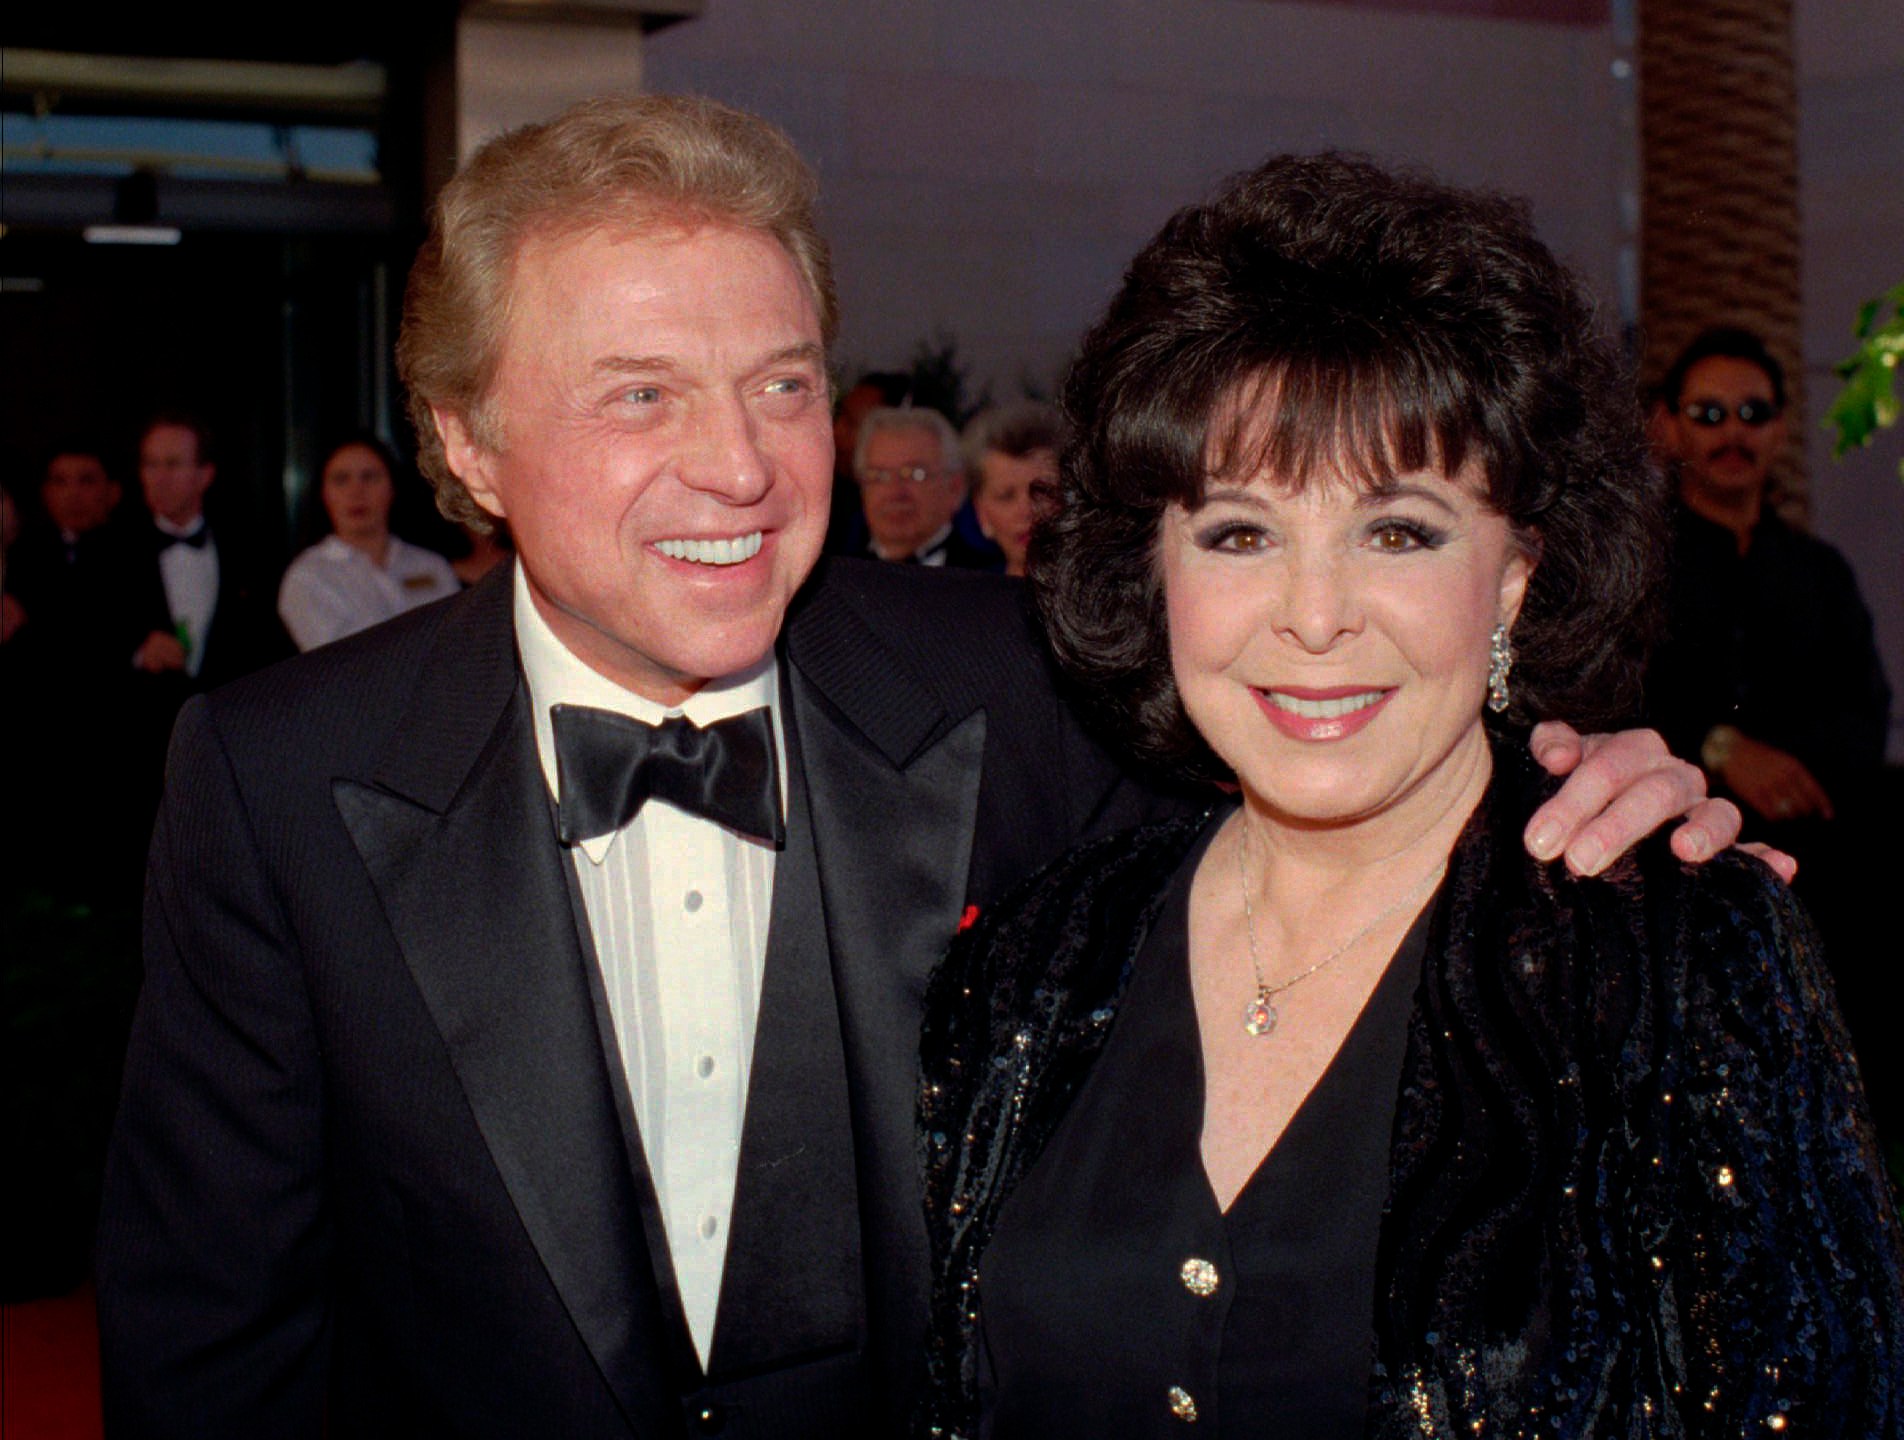 FILE - Singer Steve Lawrence, left, and his wife Eydie Gorme arrive at a black-tie gala called honoring Frank Sinatra in Las Vegas on May 30, 1998. Lawrence, a singer and top stage act who as a solo performer and in tandem with his wife Gorme kept Tin Pan Alley alive during the rock era, died Wednesday, March 6, 2024 at age 88. Gorme died on Aug. 10, 2013. (AP Photo/Lennox McLendon, File)